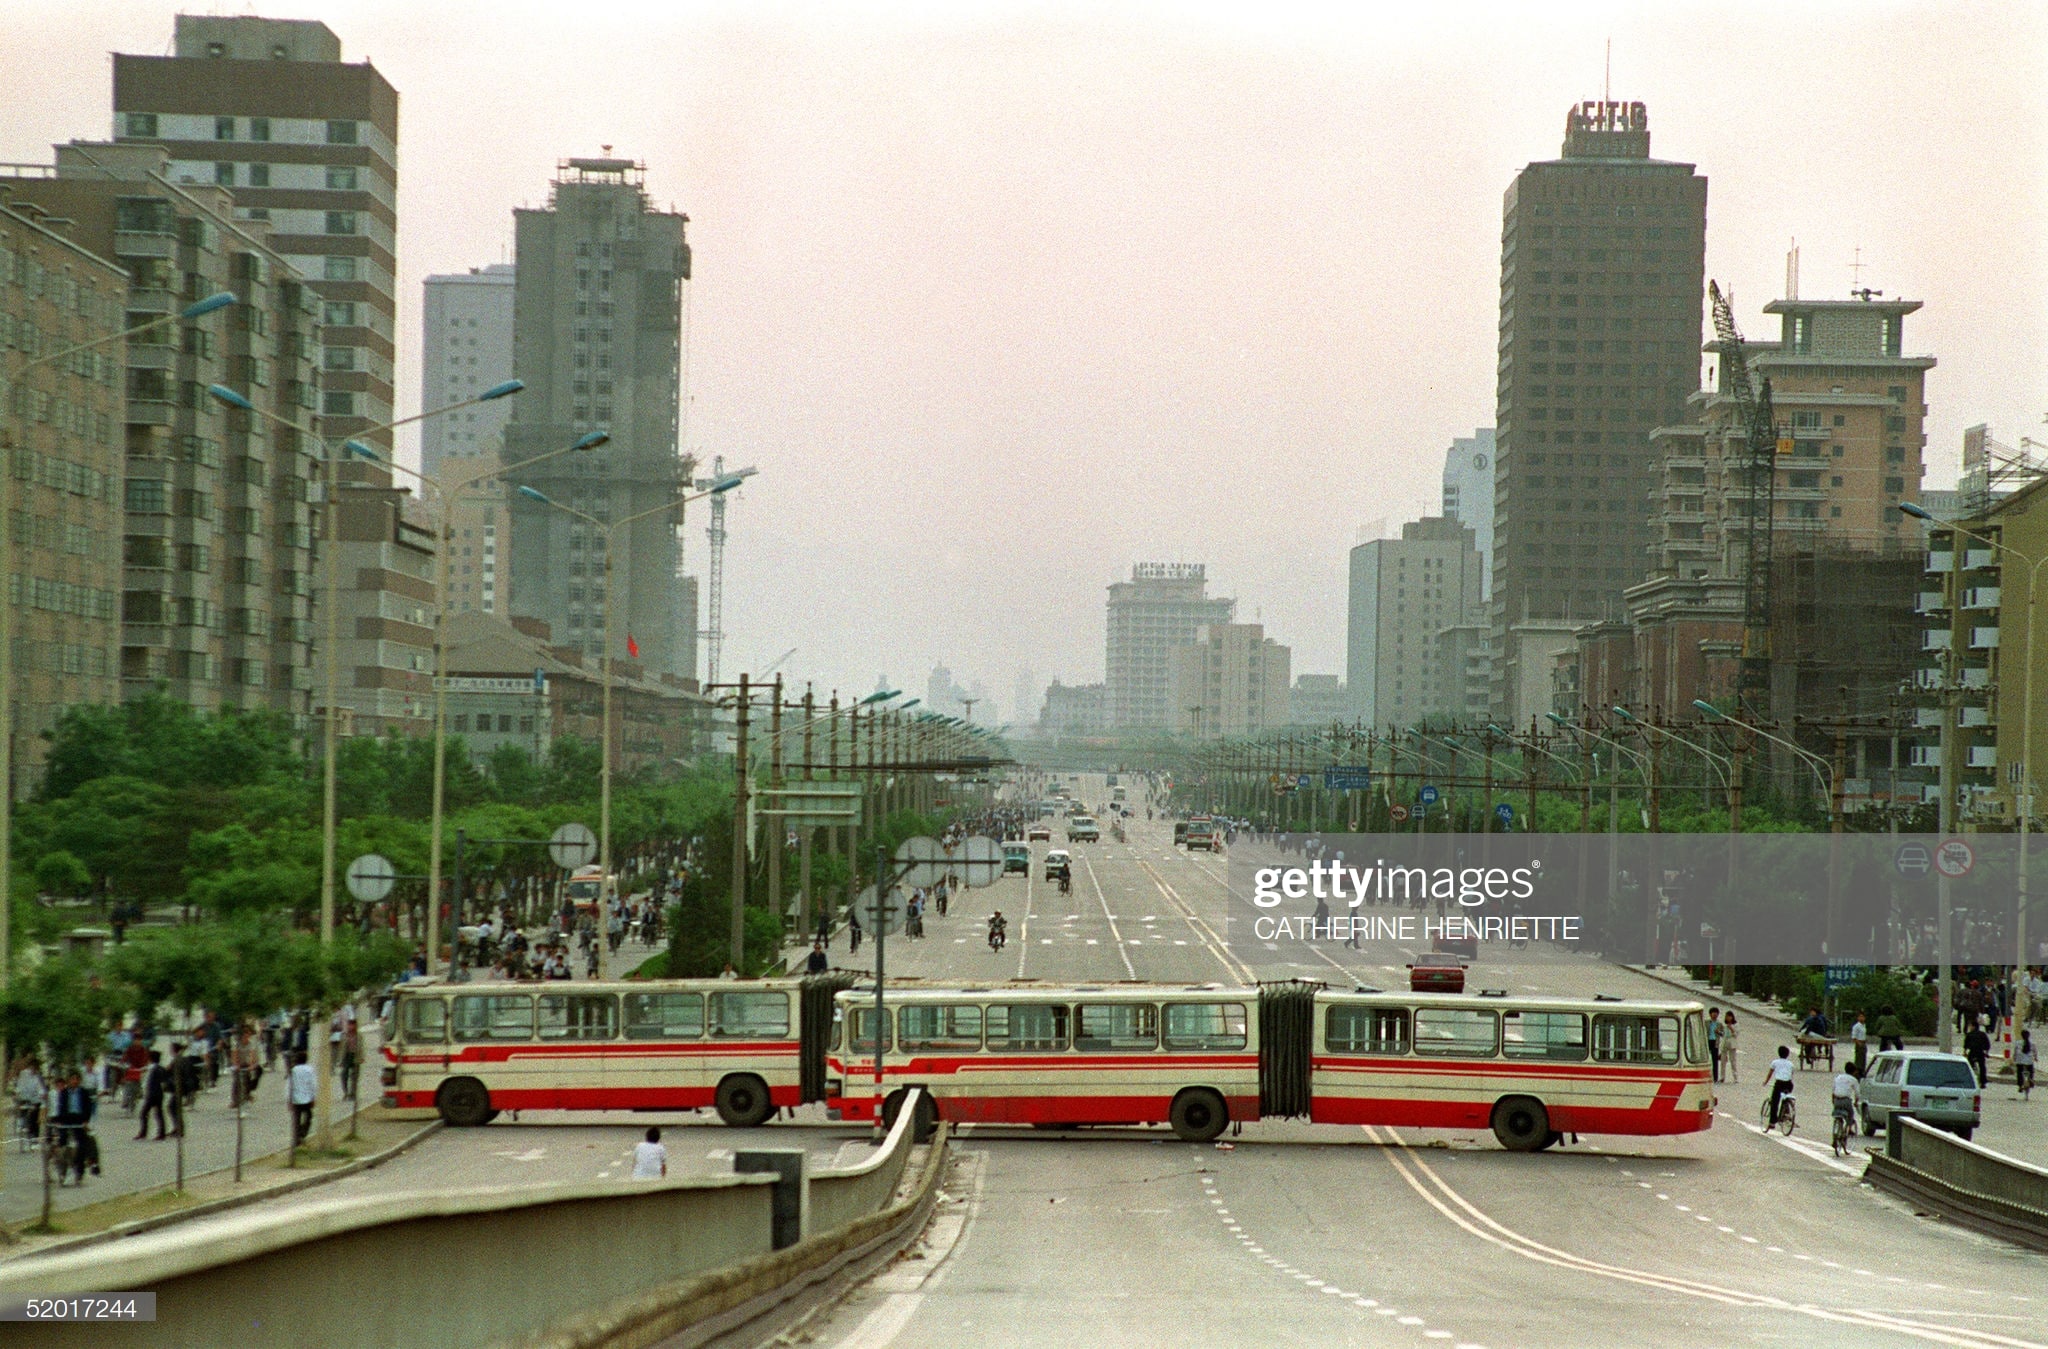 BEIJING CHINA - MAY 21 Two city buses block the main street to Tiananmen Square Jianguomen Avenue 21 May 1989 to keep the military forces out after the Martial Law was proclaimed in Beijing 20 May In a show of force 04 June China leaders vented their fury and frustration on student dissidents and their pro-democracy supporters Several hundred people have been killed and thousands wounded when soldiers moved on Tiananmen Square during a violent military crackdown ending six weeks of student demonstrations Photo credit should read CATHERINE HENRIETTEAFPGetty Images